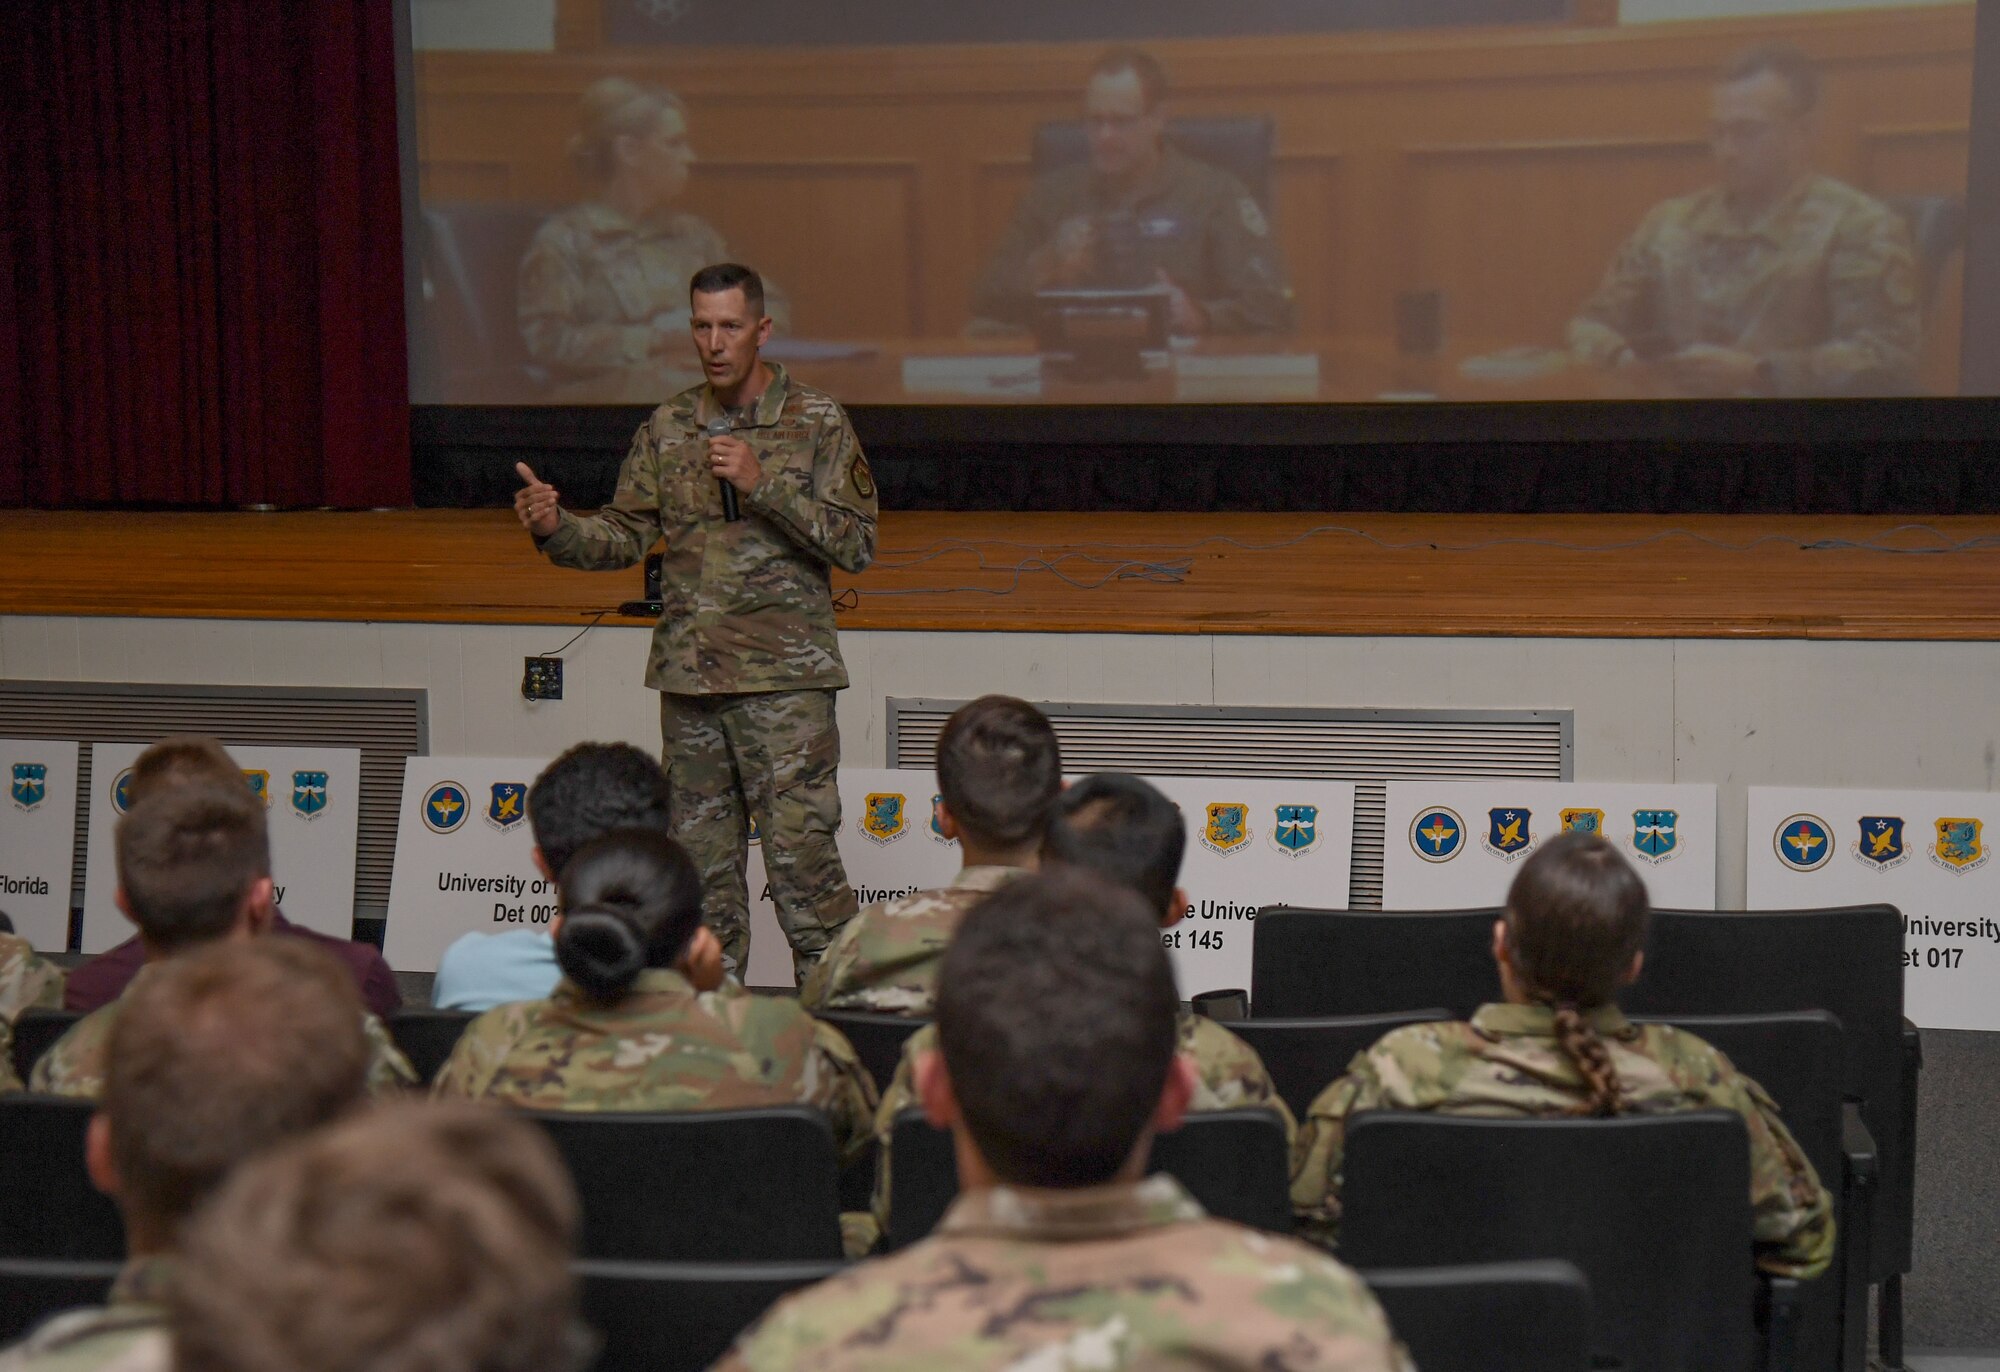 U.S. Air Force Col. Billy Pope, 81st Training Wing commander, delivers welcoming remarks to Air Force ROTC cadets during Pathways to Blue inside the Welch Theater at Keesler Air Force Base, Mississippi, March 31, 2023.